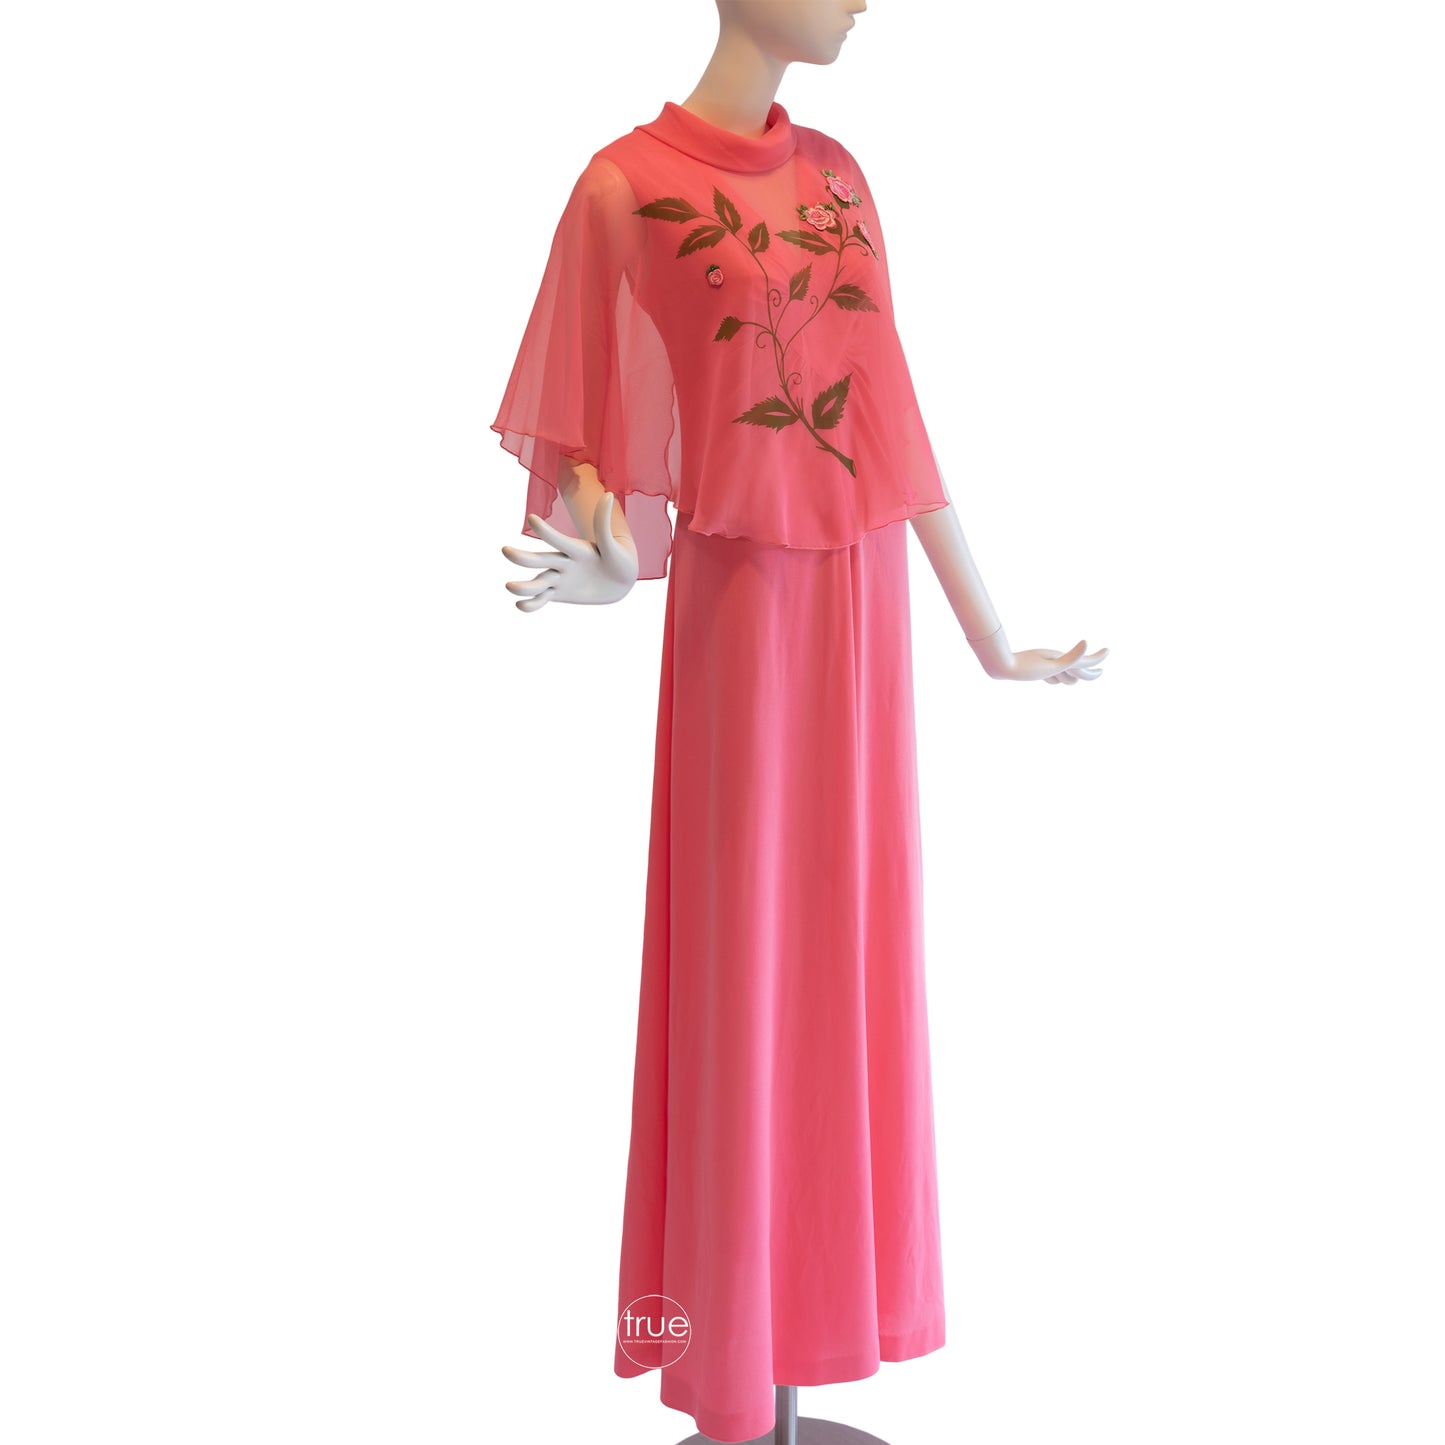 vintage 1970's dress ...slinky coral dream maxi dress with sheer capelet